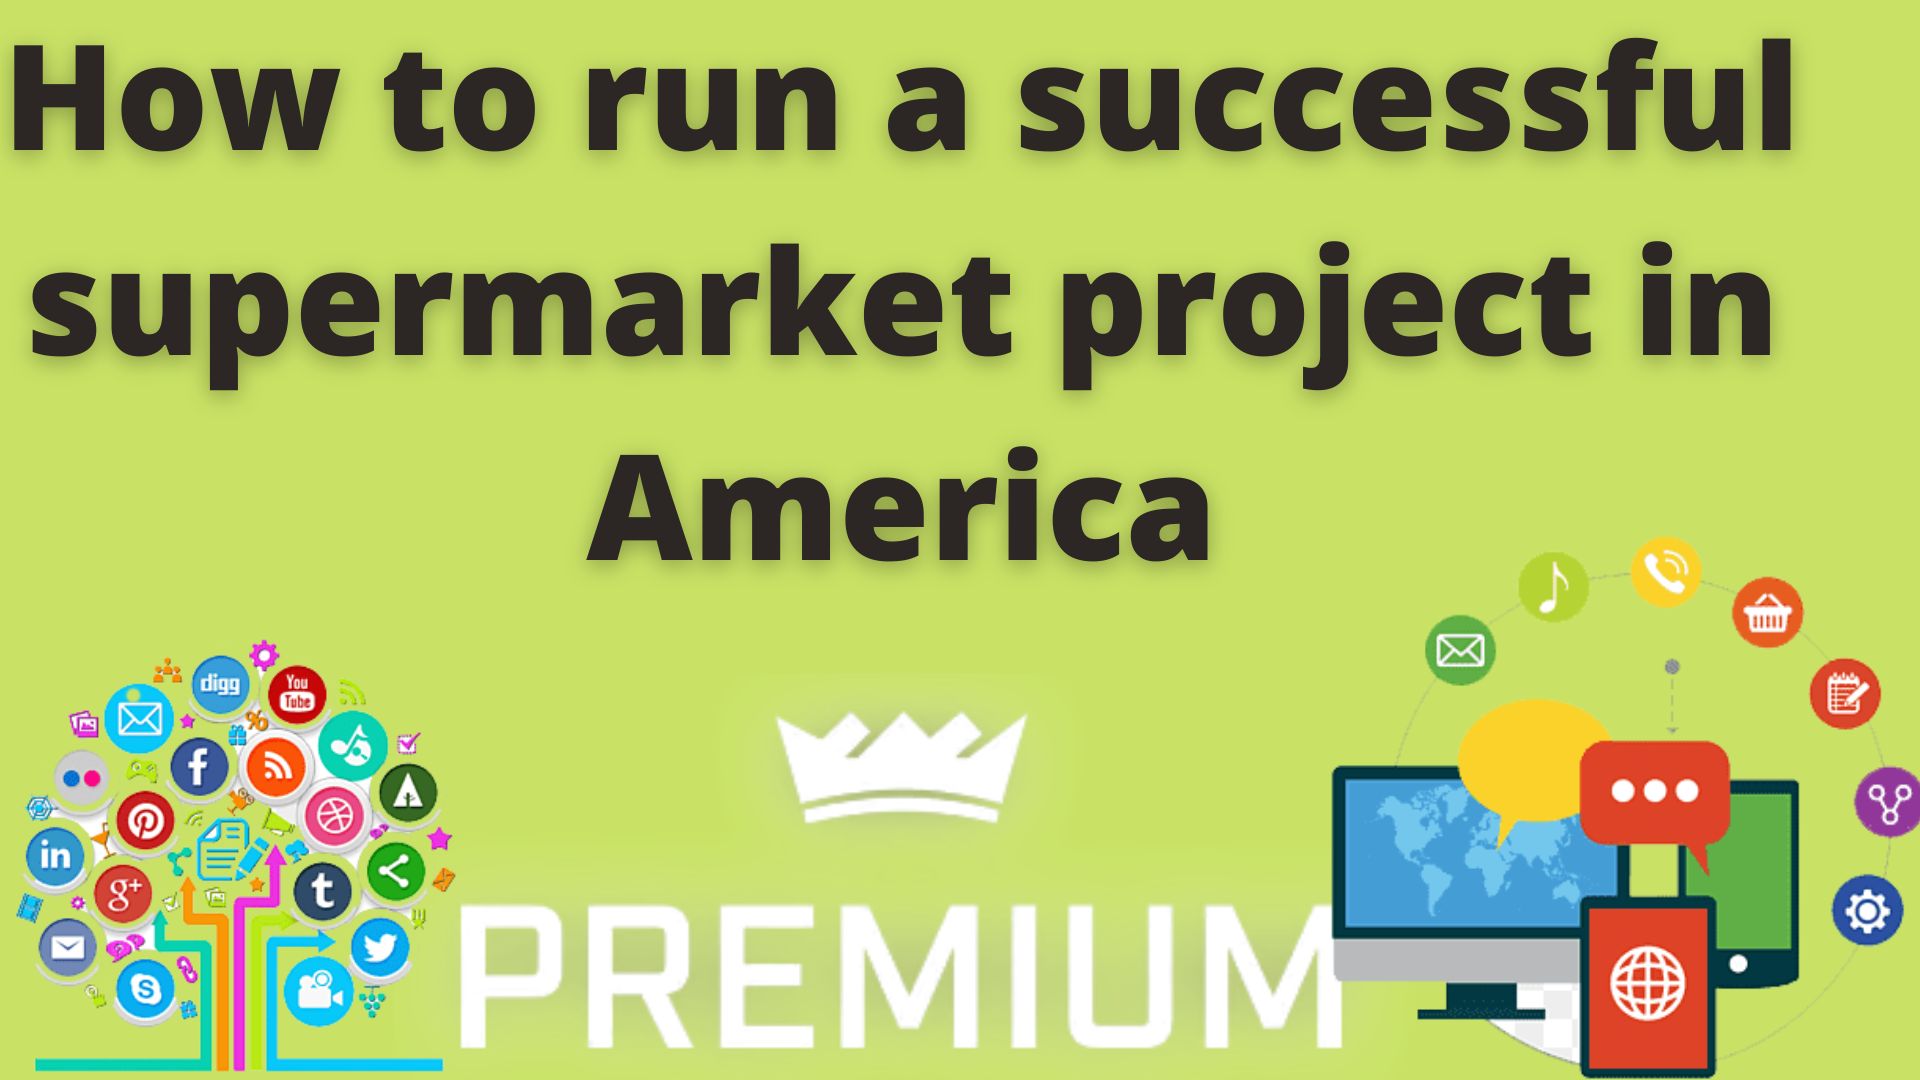 How To Run A Successful Supermarket Project In America